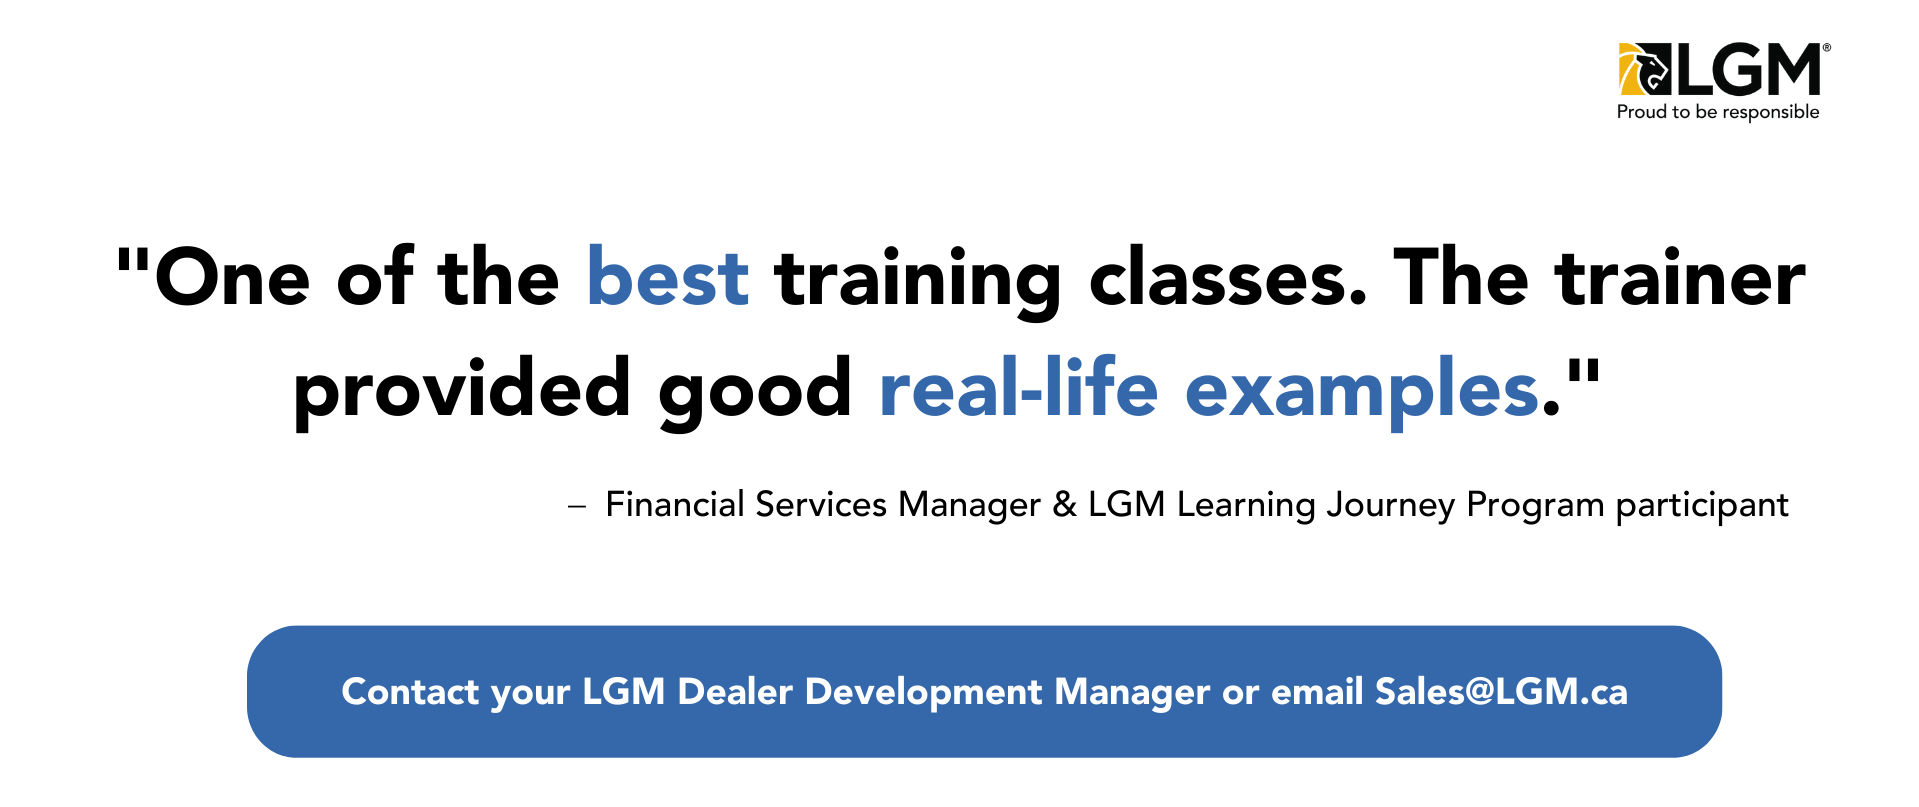 Quote from a learning journey participant says: " This was one of the best training classes. The trainer provided good real-life examples." Contact your local LGM Dealer Development Manager or email Sales@LGM.ca for more information and to get enrolled.